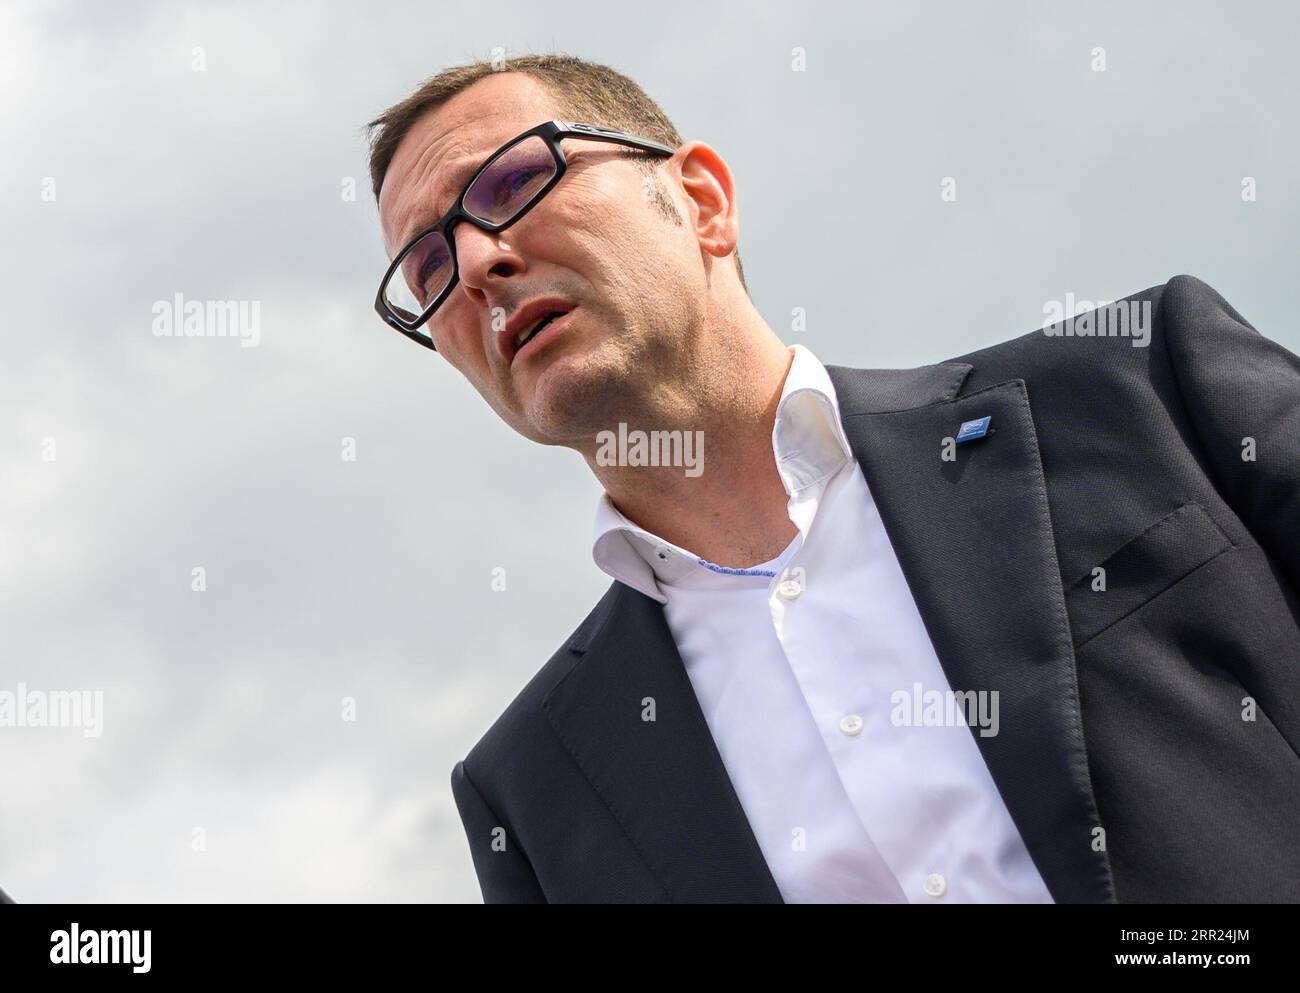 Emlichheim, Germany. 16th Aug, 2019. Mario Mehren, Chairman of the Board of Wintershall Dea, pictured during his visit to one of his company's oil fields in Emlichheim on the Dutch border. The head of energy company Wintershall Dea wants to cut costs significantly as part of the company's withdrawal from Russia. (To dpa 'Wintershall Dea boss defends savings program') Credit: Mohssen Assanimoghaddam/dpa/Alamy Live News Stock Photo